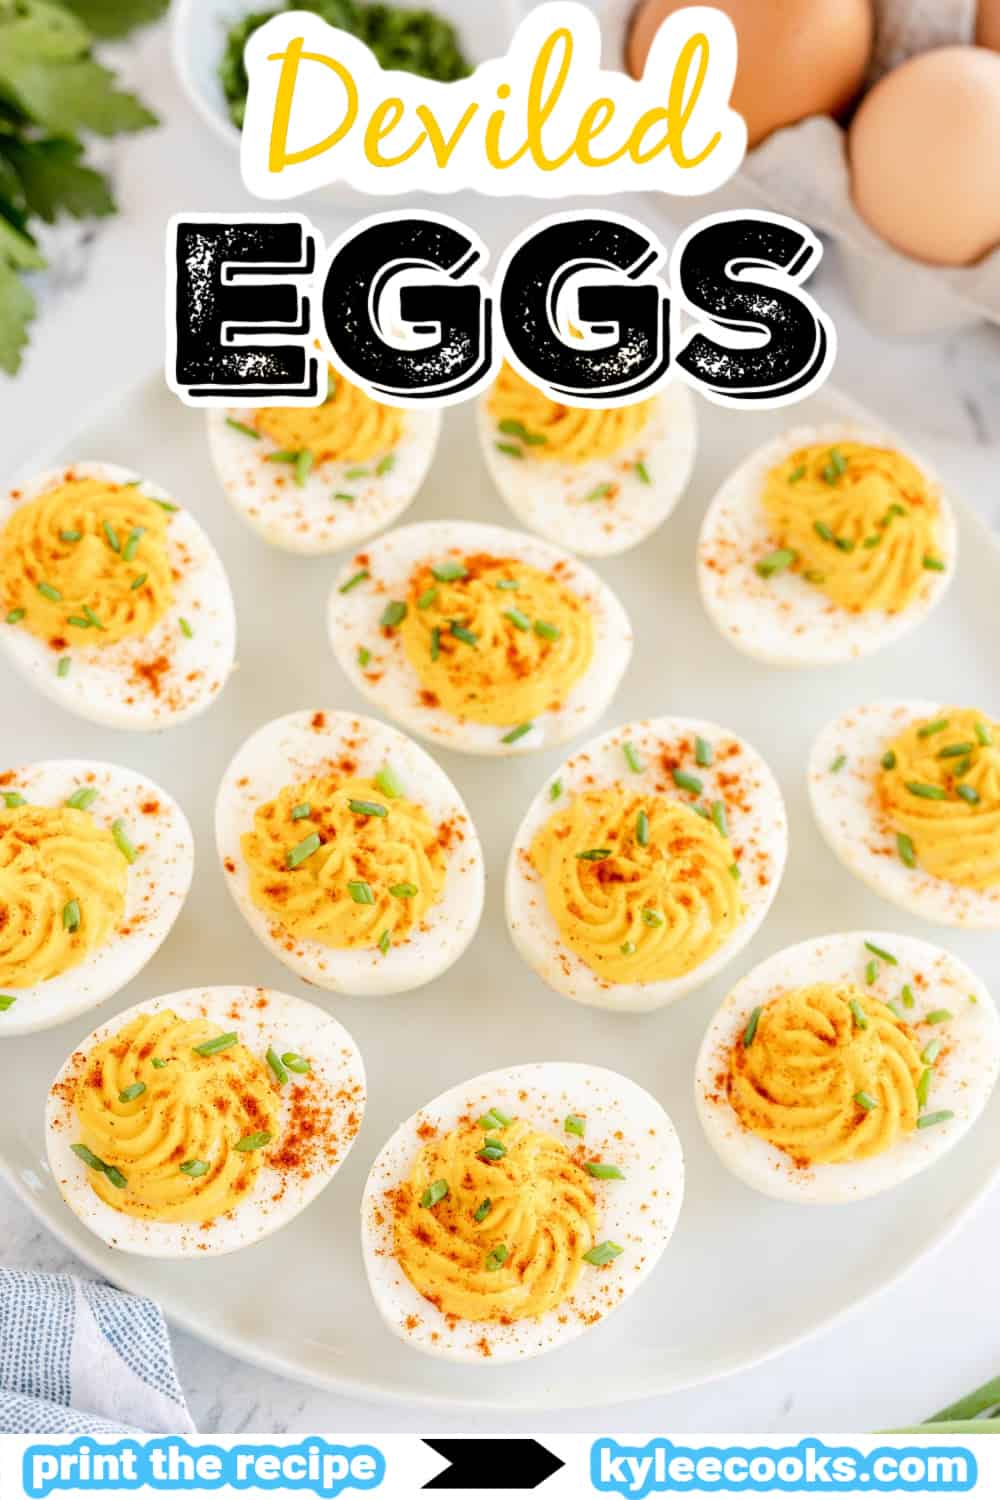 deviled egg image with ingredients and text overlay